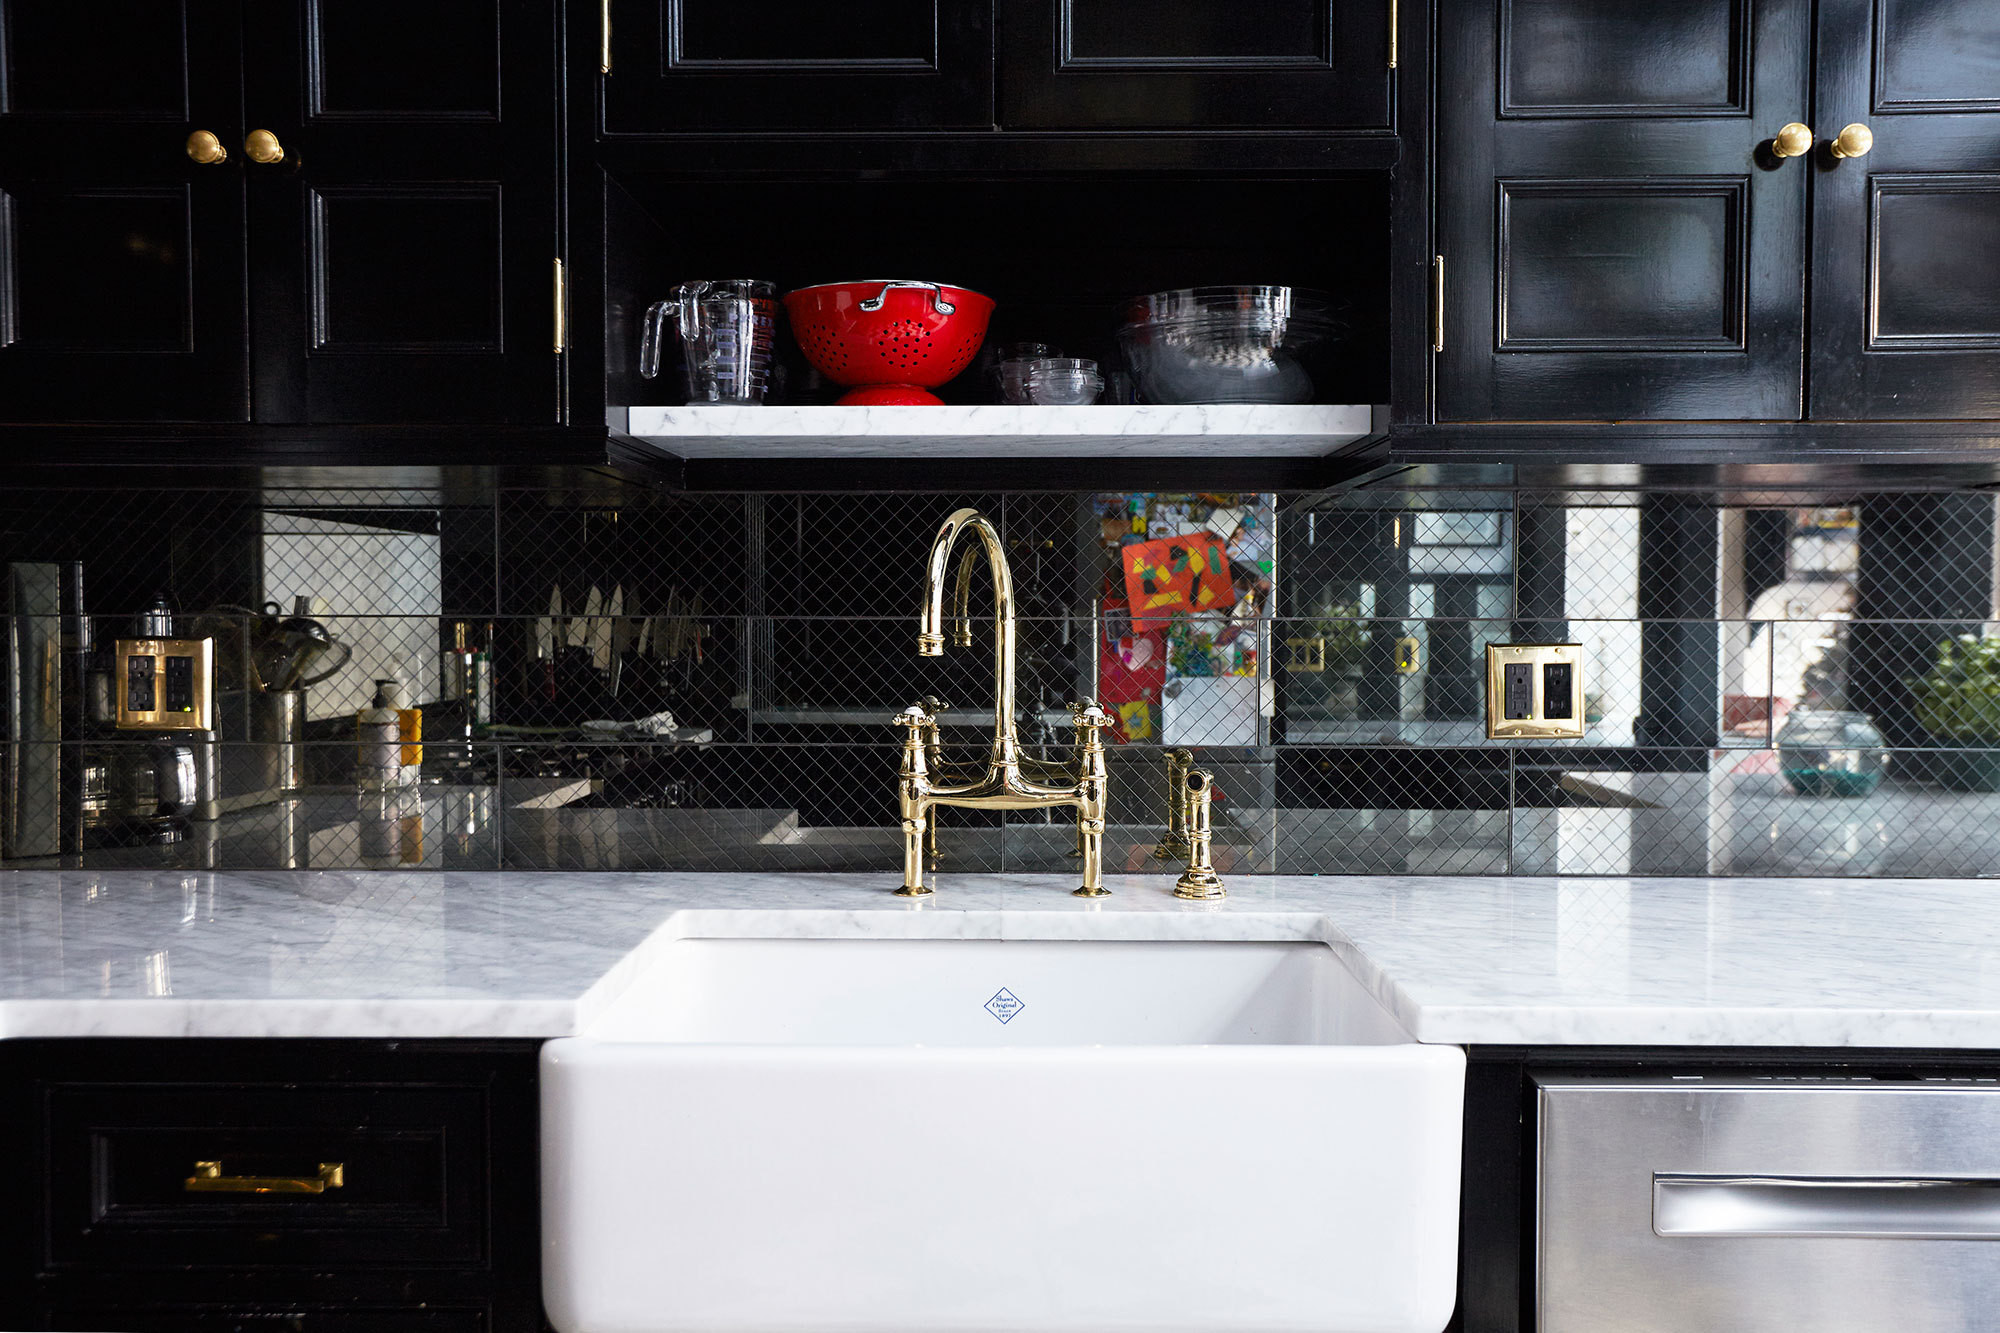 The high-glosss black and brass accented brownstone kitchen